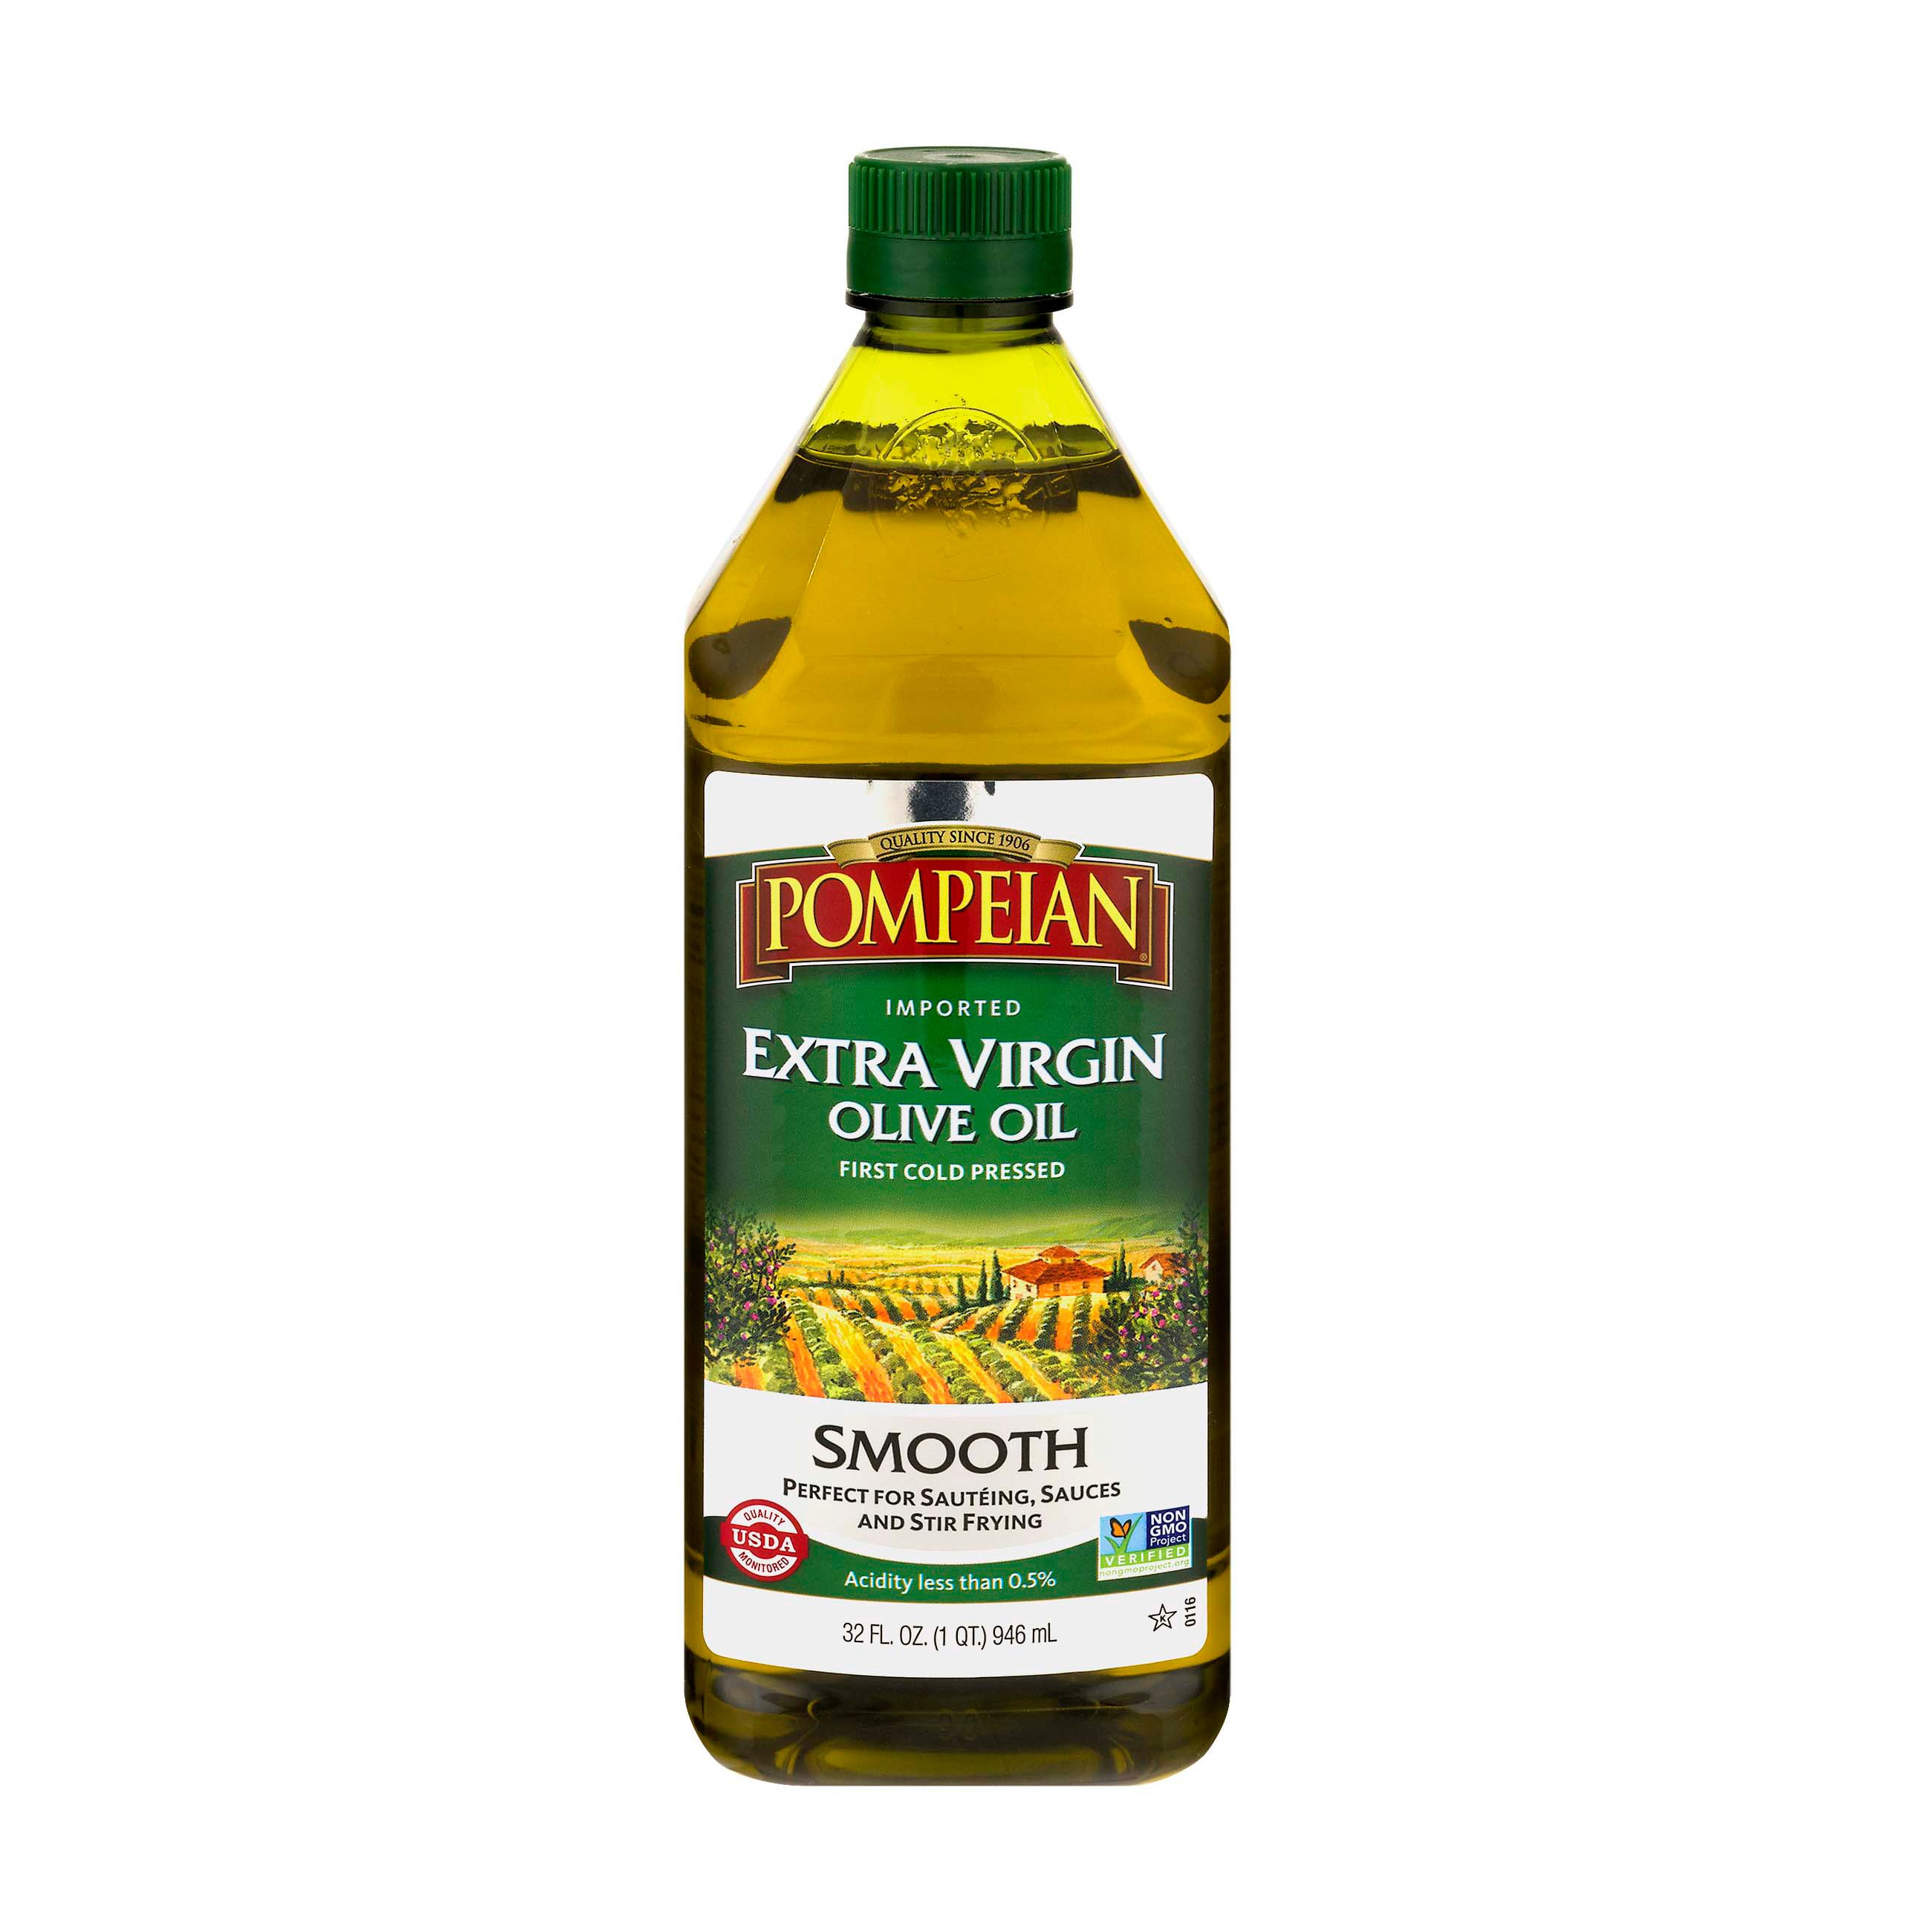 Pompeian Smooth Extra Virgin Olive Oil Shop Oils At H E B